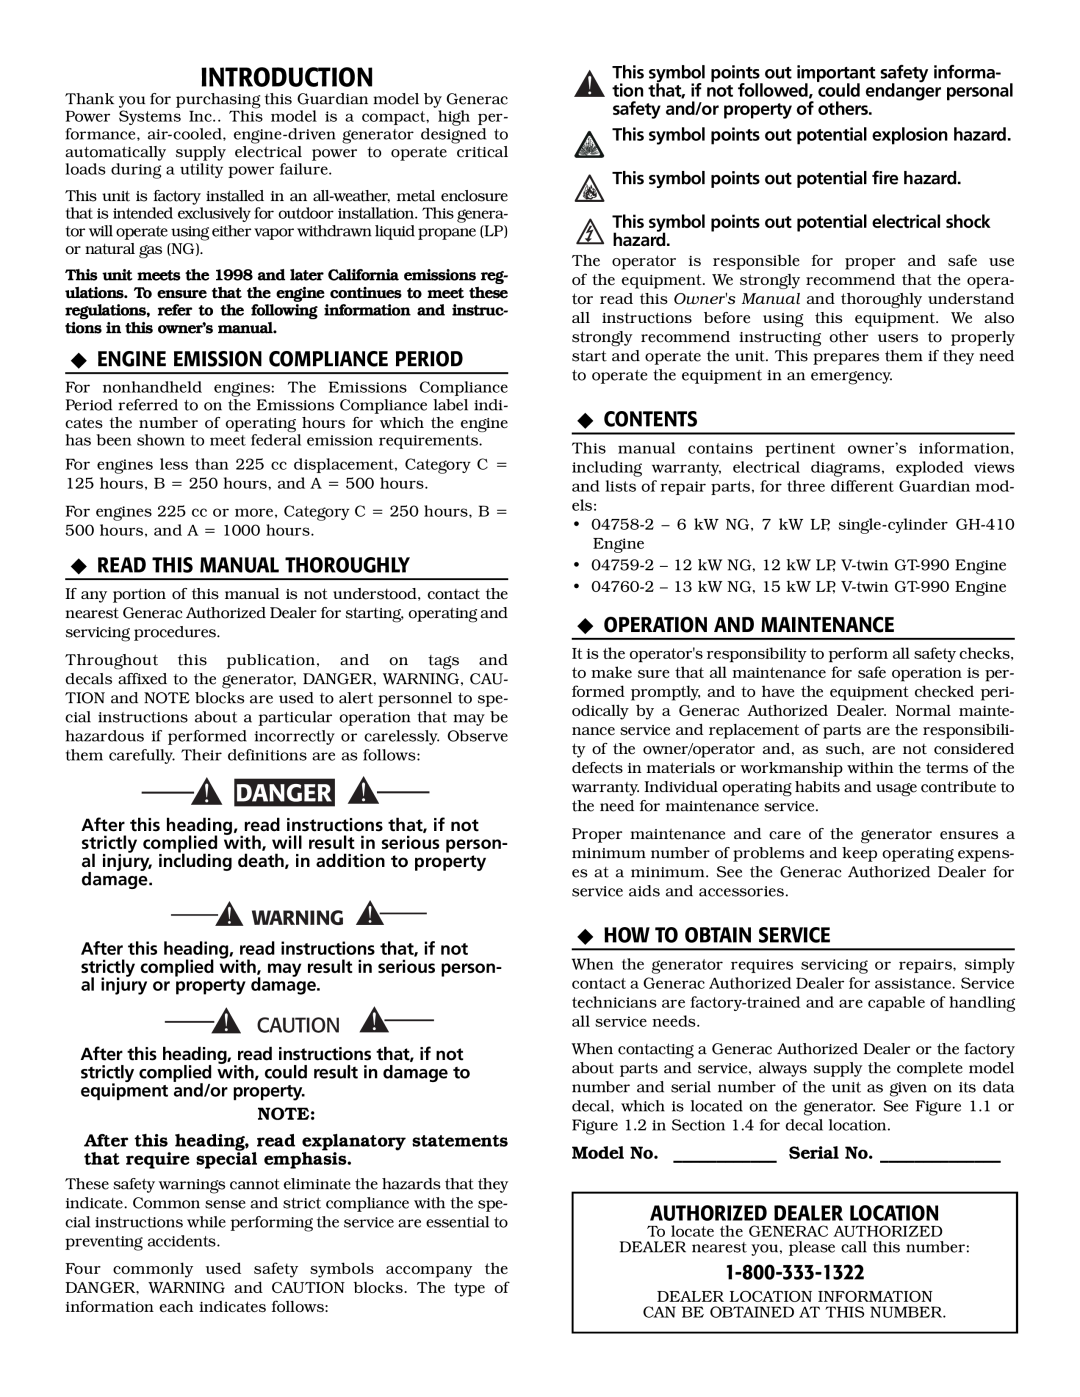 Generac Power Systems 04758-2, 04759-2, 04760-2 Introduction, Danger, ‹ Engine Emission Compliance Period, ‹ Contents 